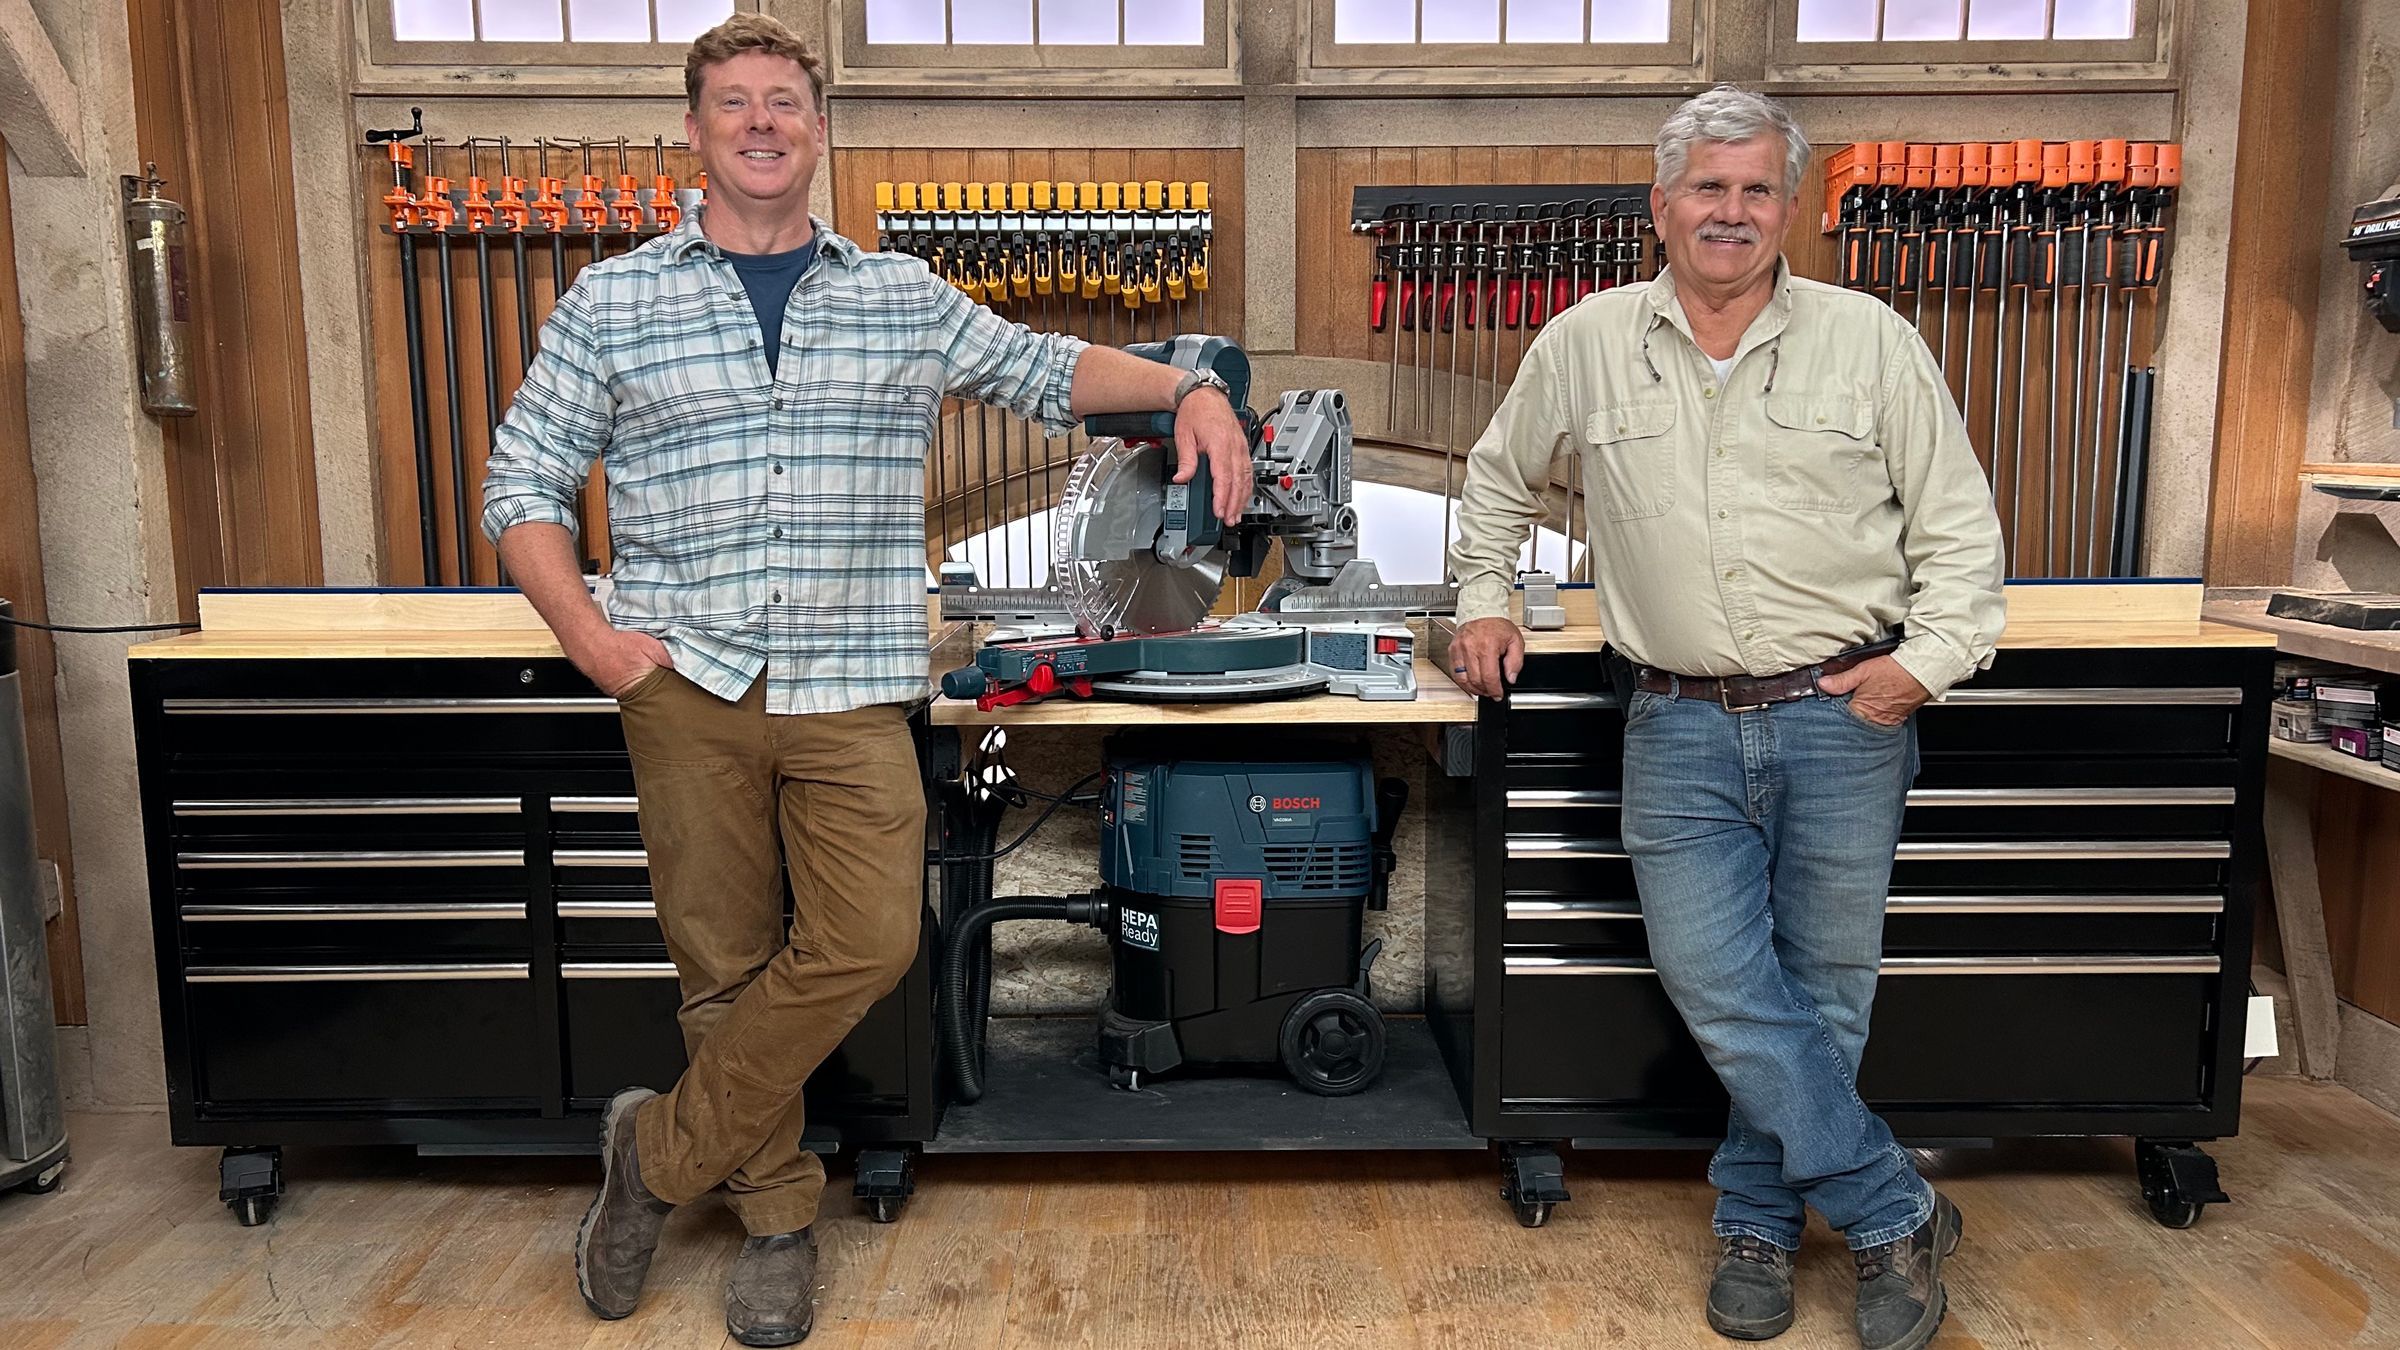 S22 E8: Tom Silva and Kevin O'Connor build a miter saw station